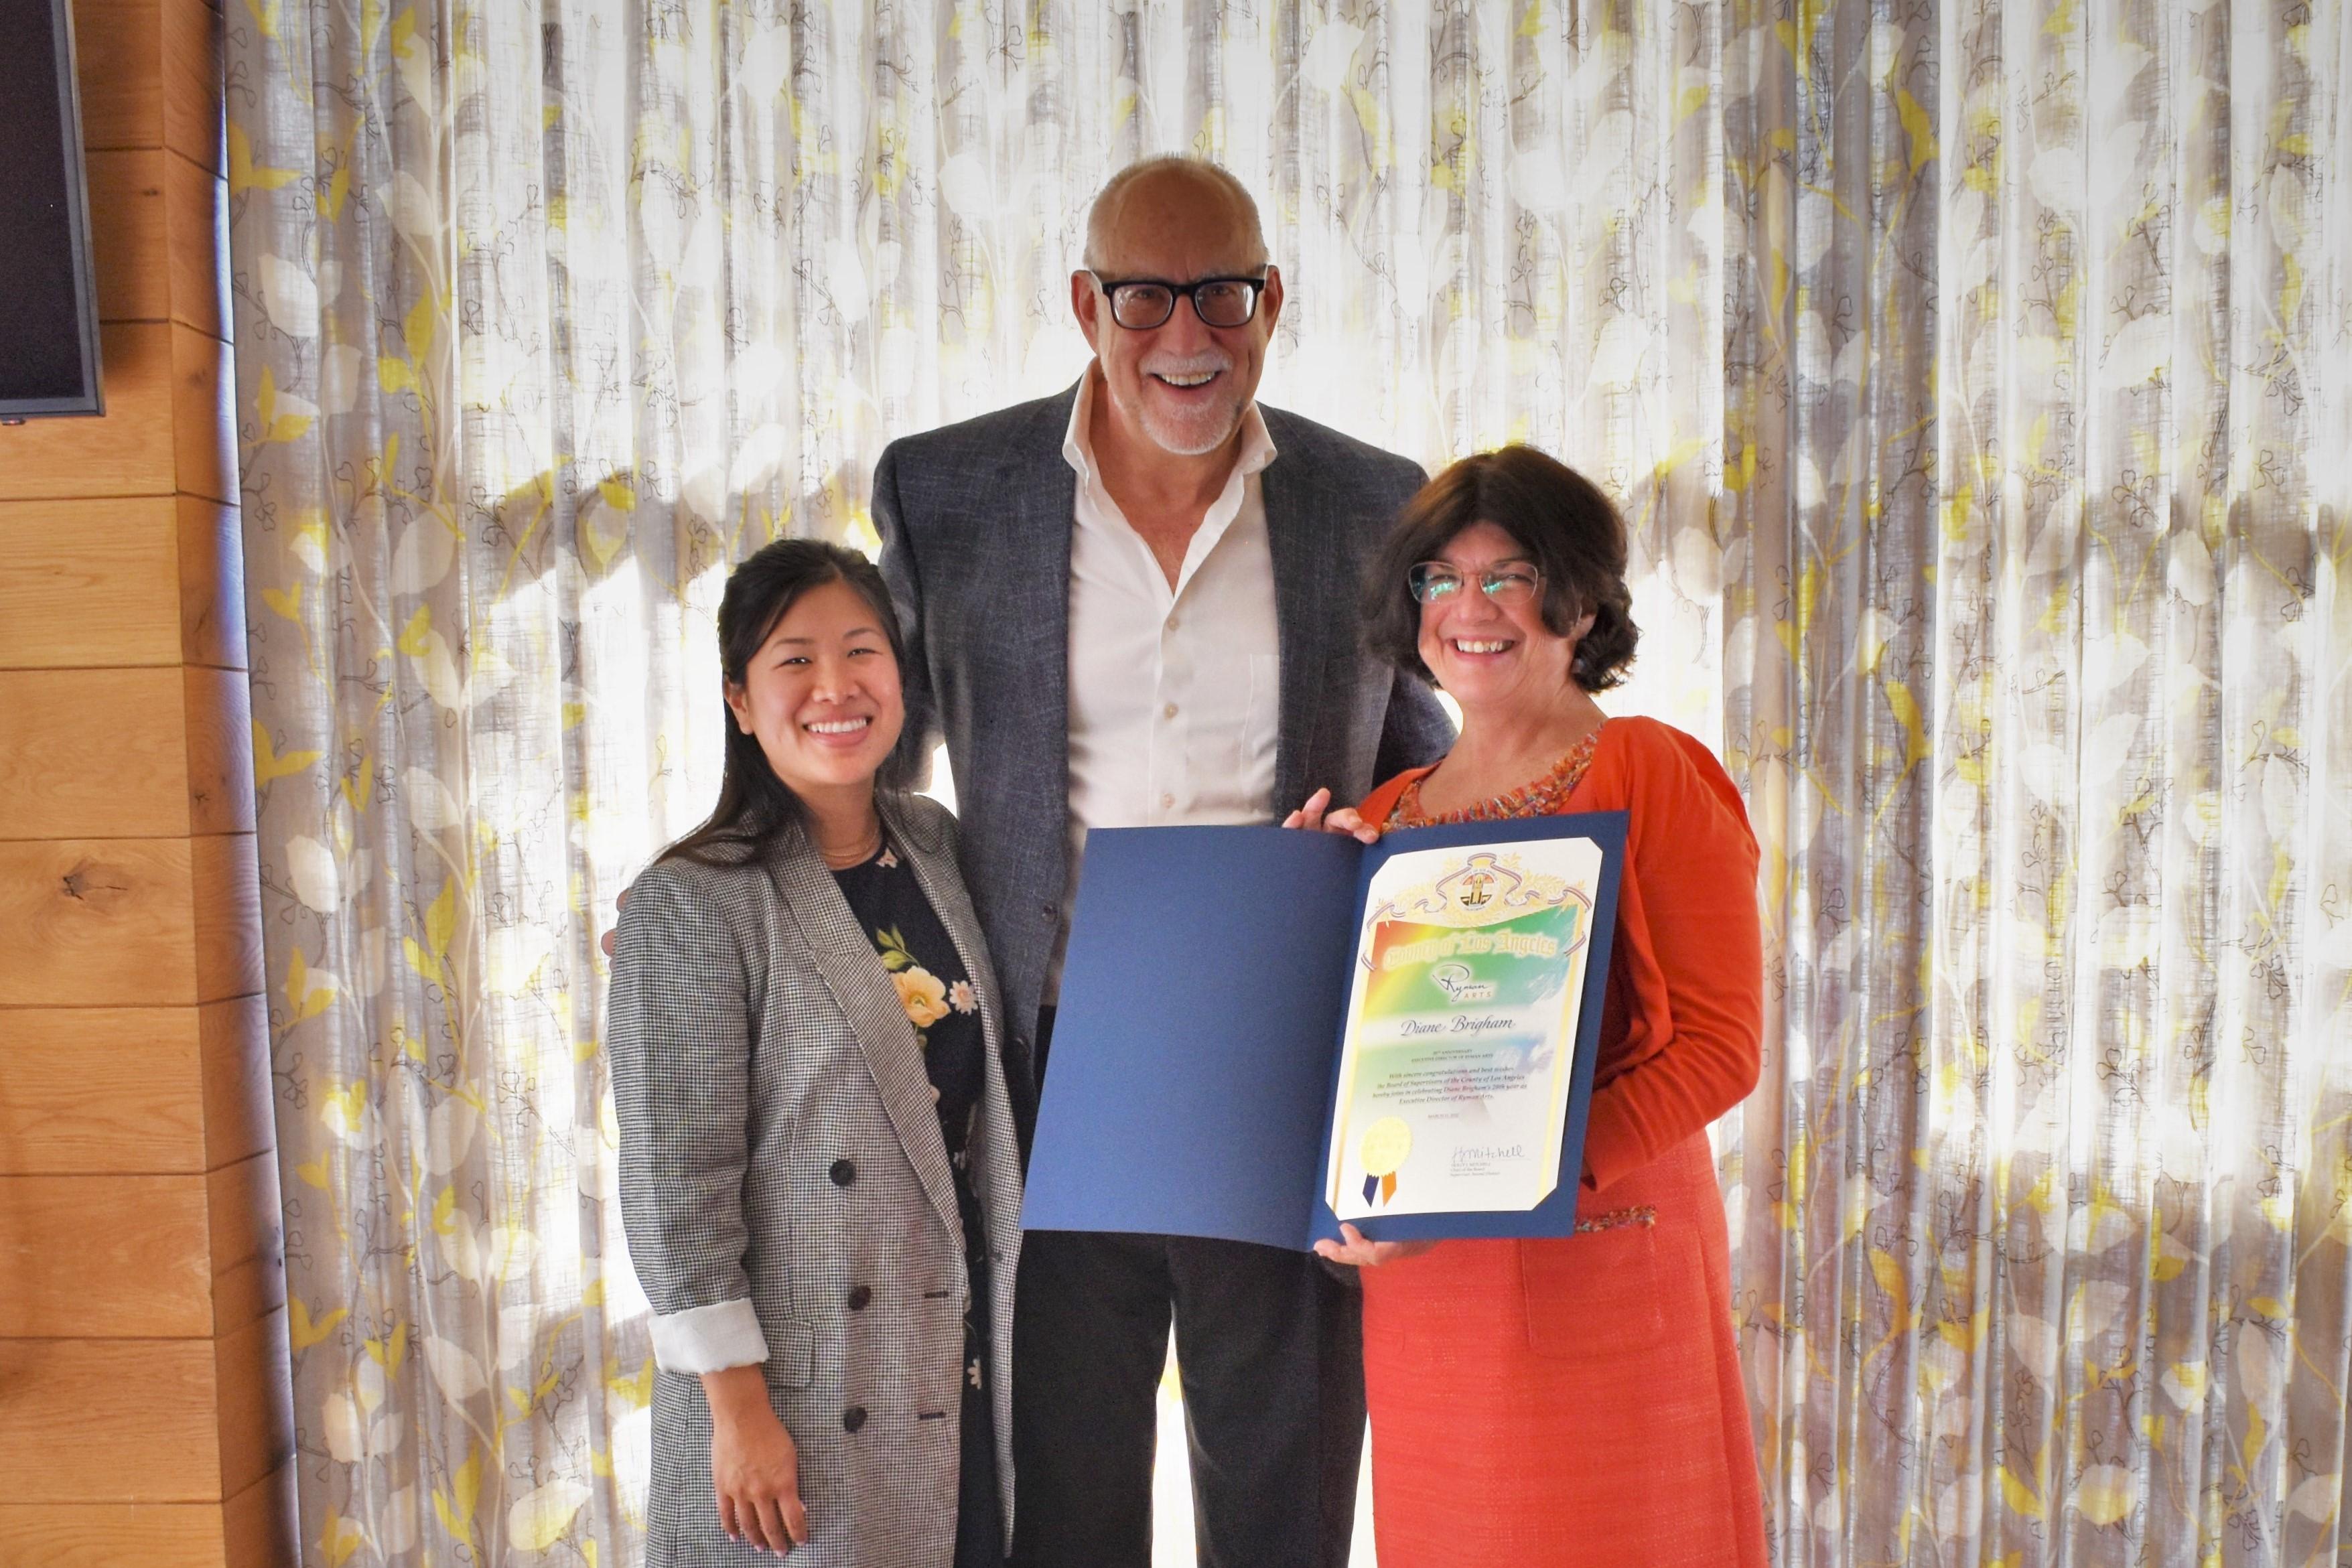 Three people standing with person on the right holding award: Shannon Huang, Phil Hettema, and Diane Brigham (left to right)